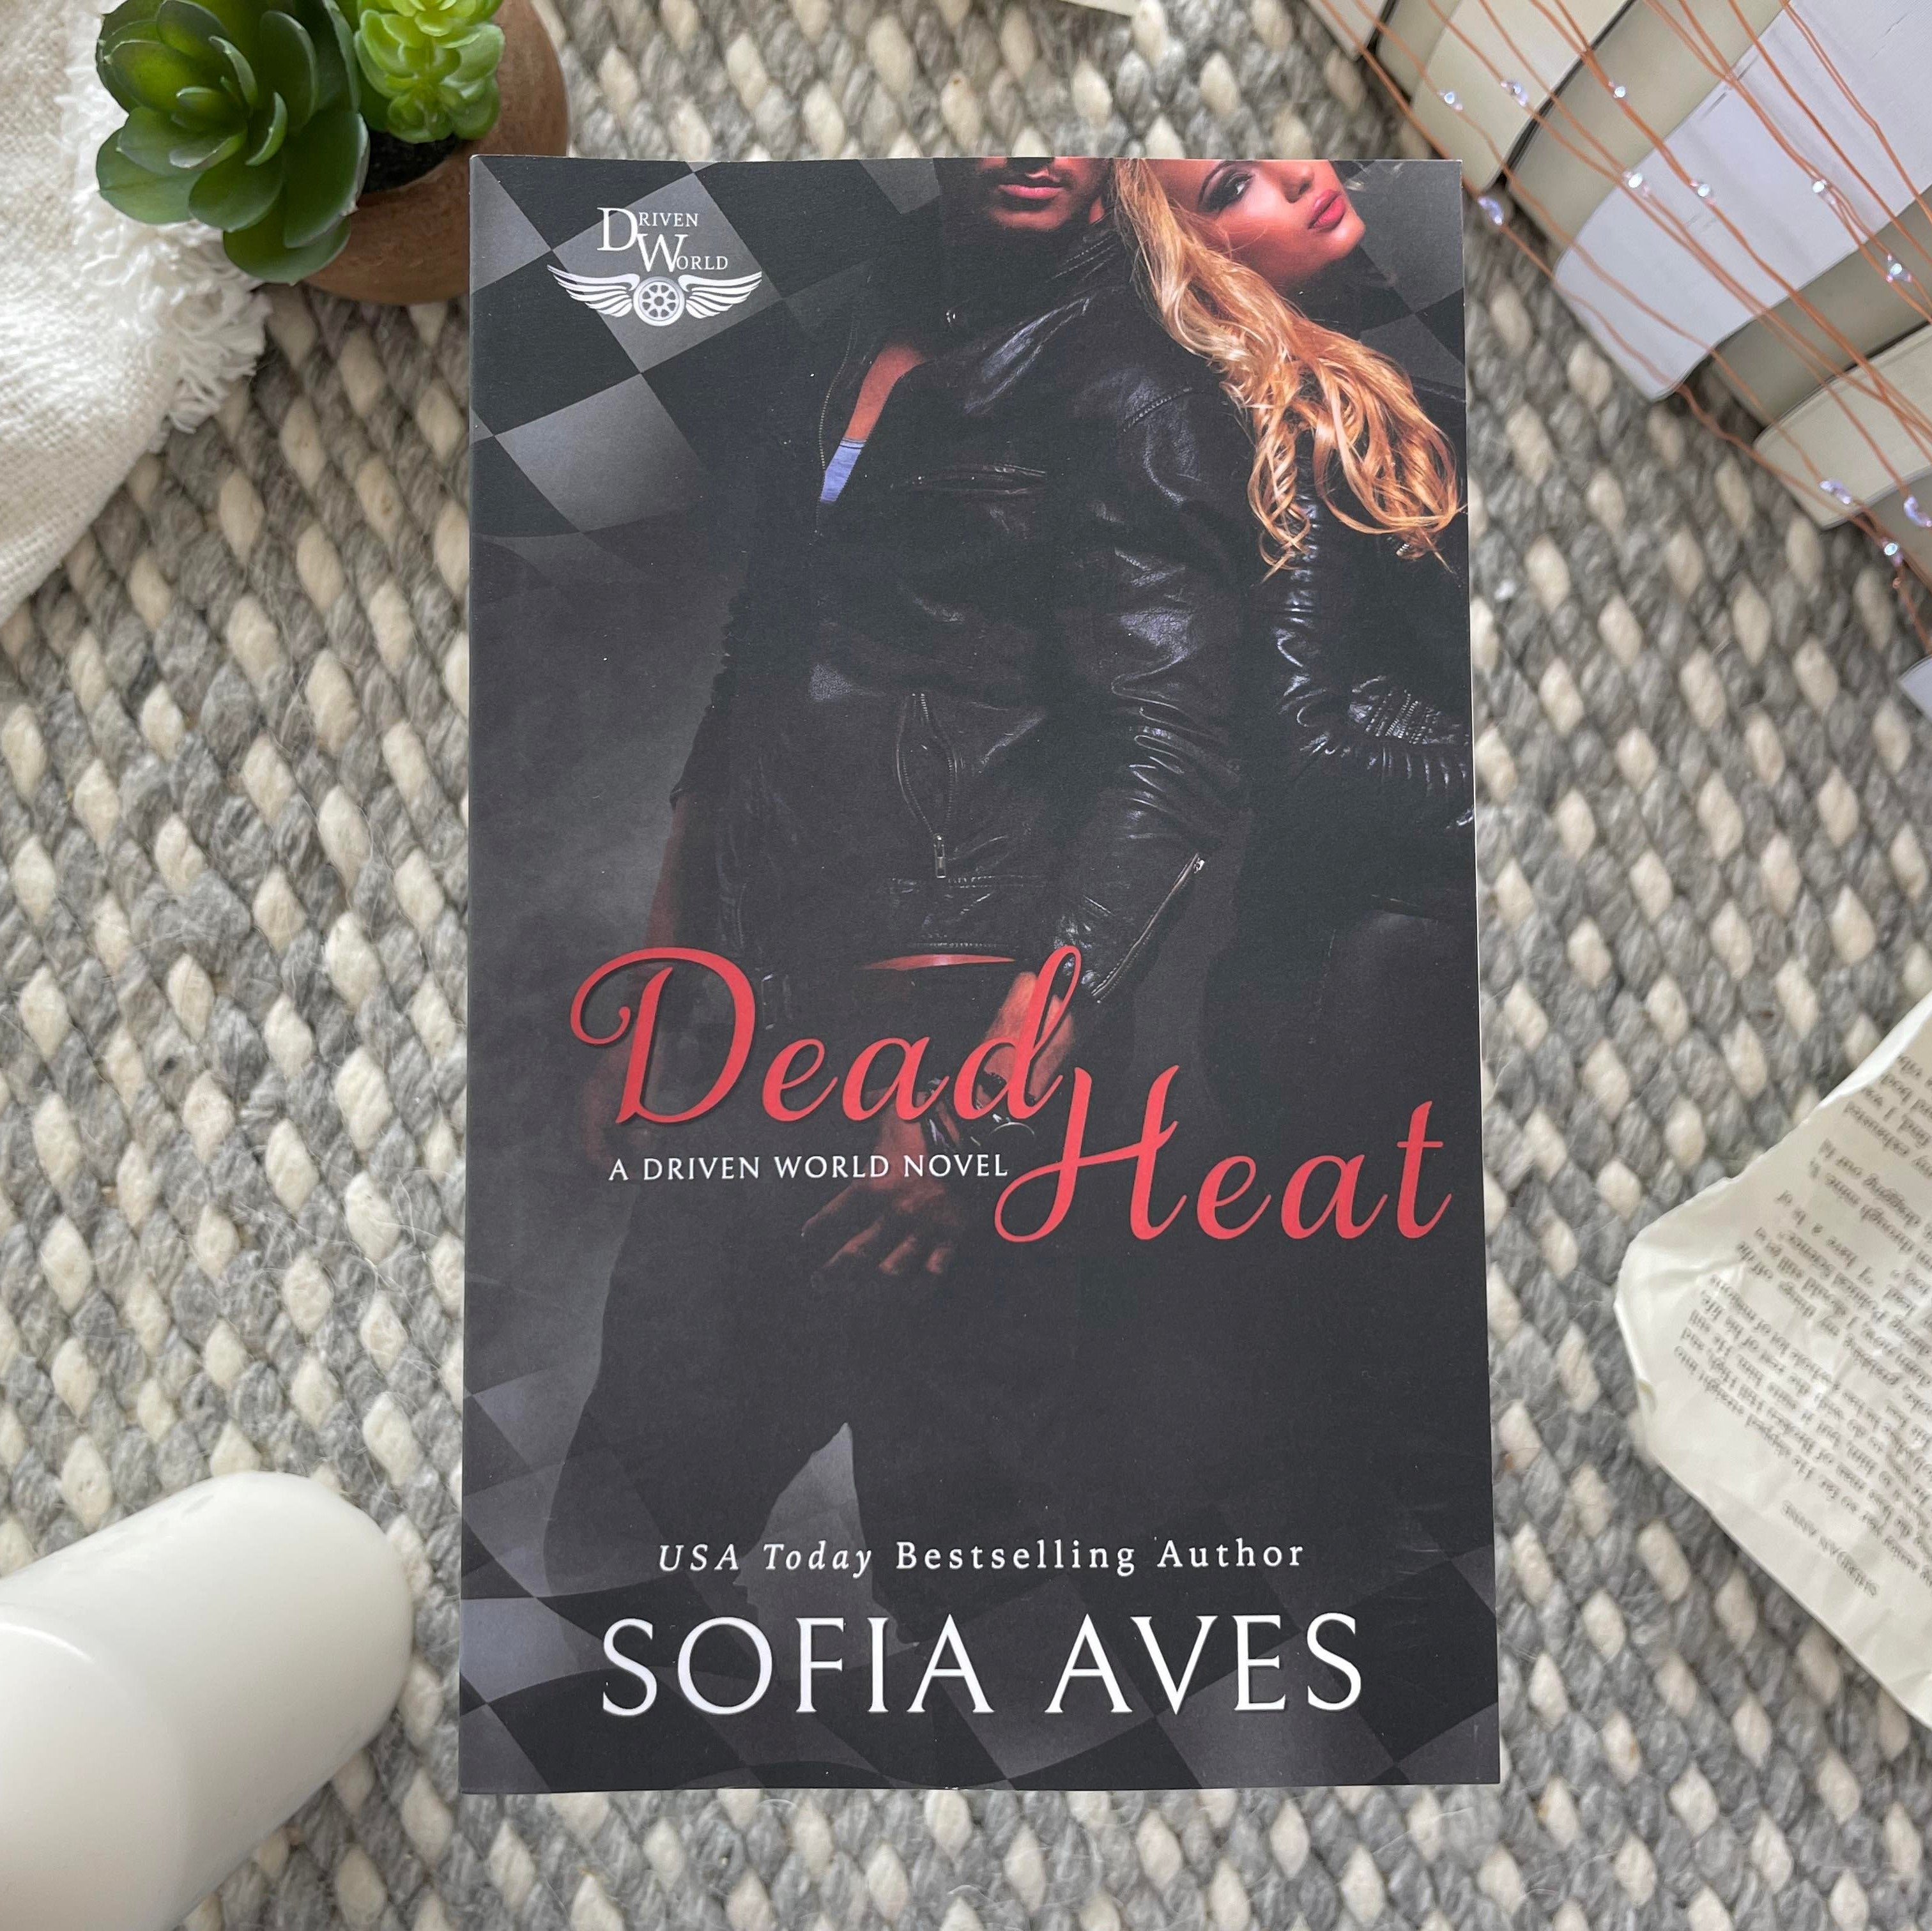 Dead Heat by Sofia Aves